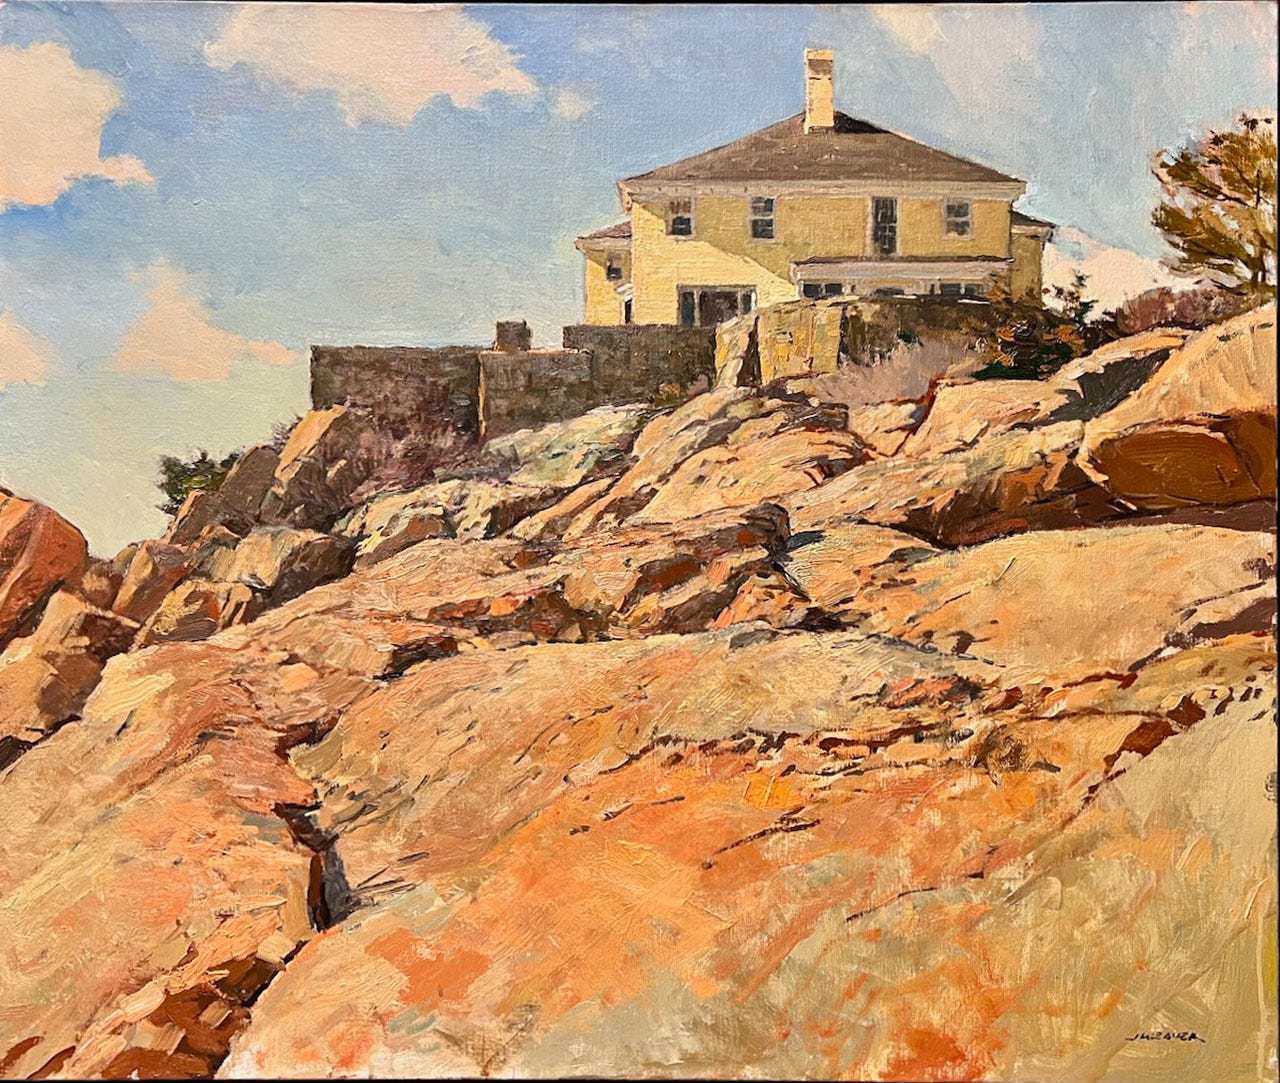 A painting of a house on a rocky cliff

Description automatically generated with low confidence